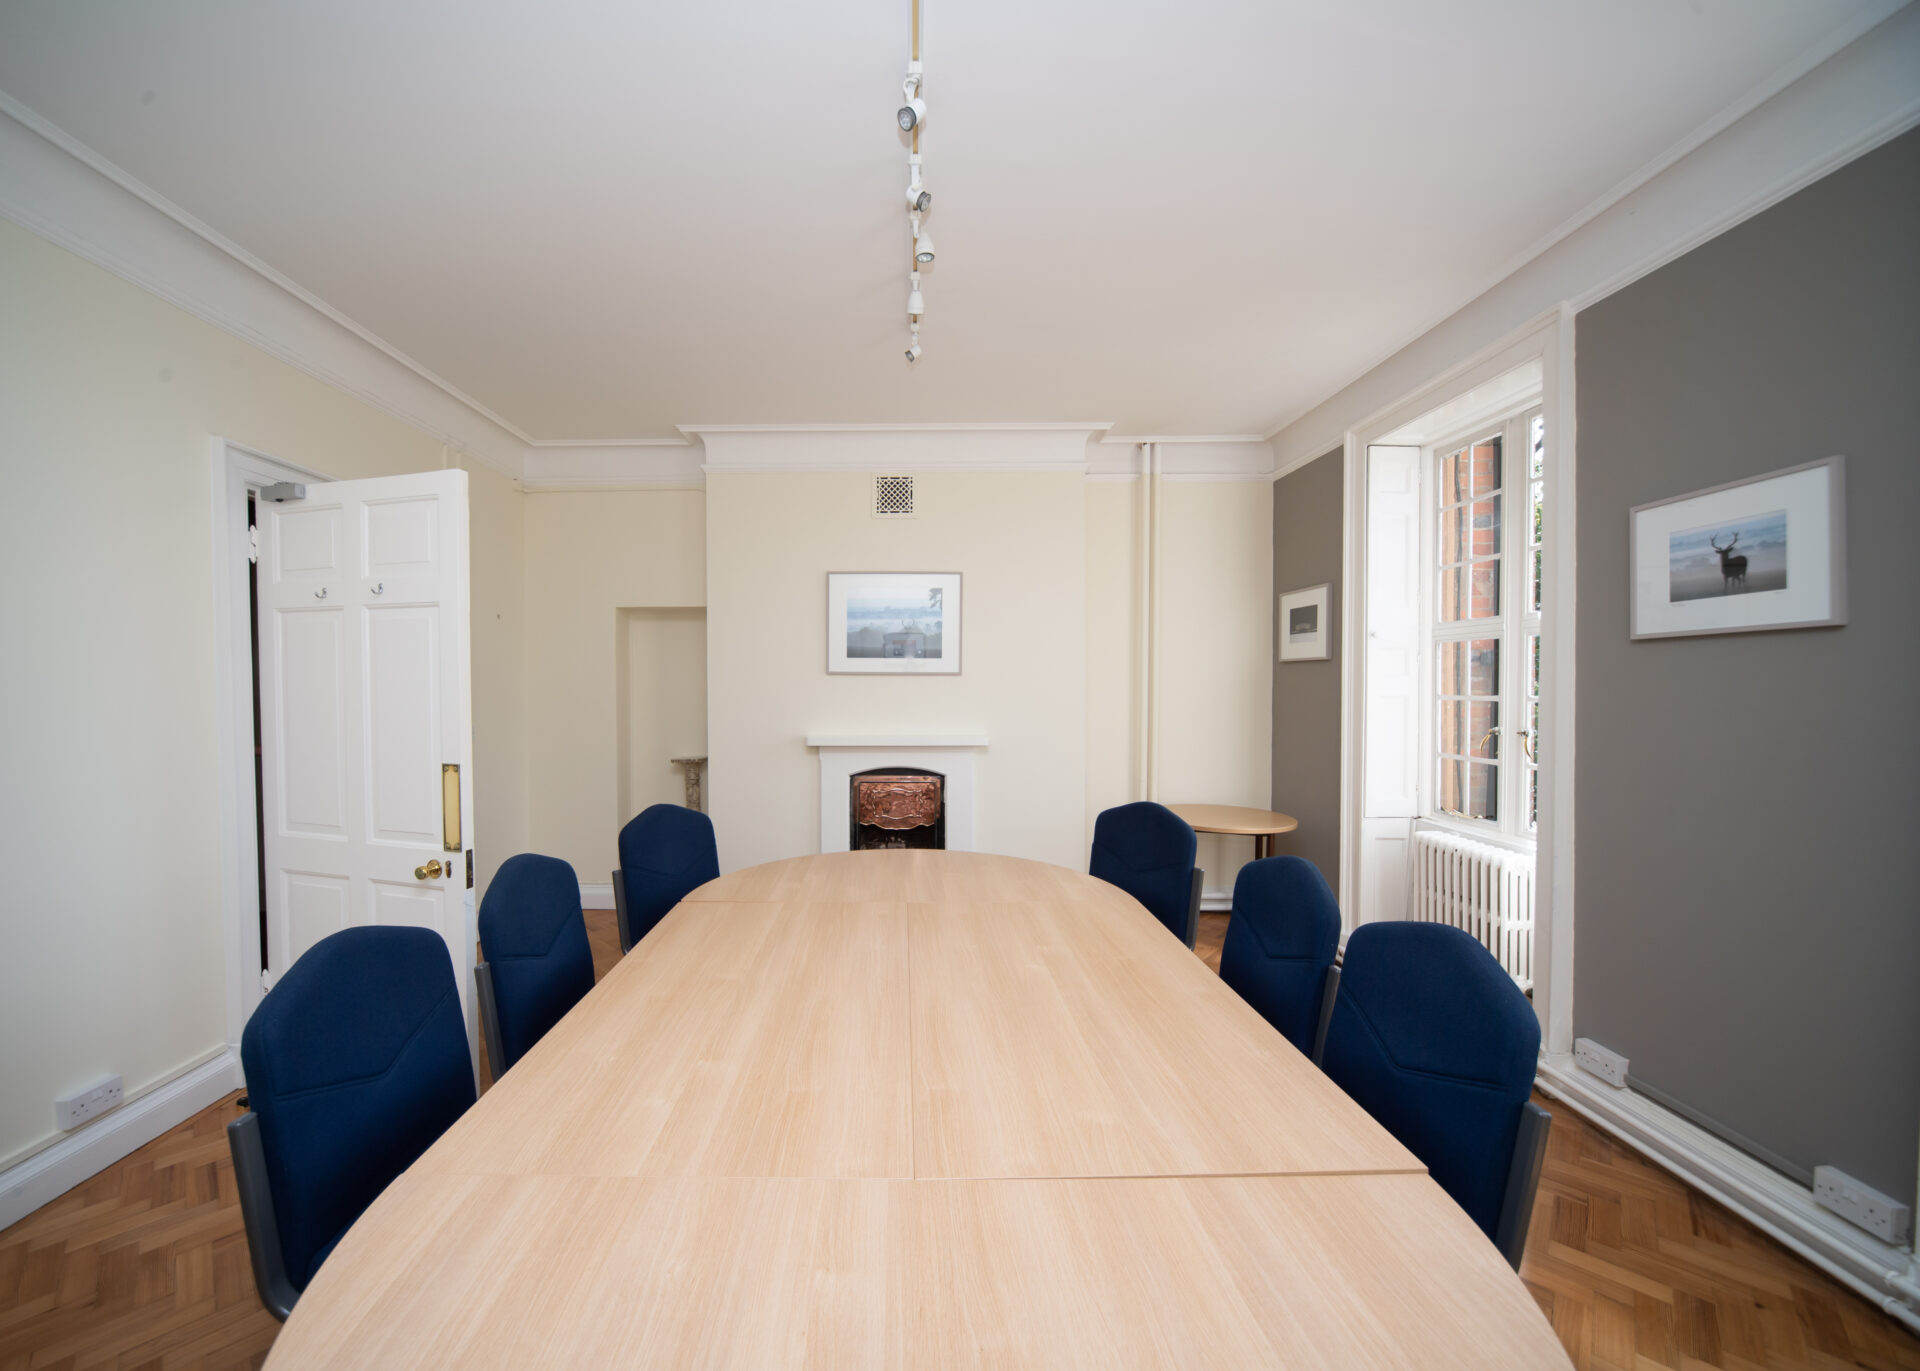 The Windsor Room, a meeting room in the main Cumberland Lodge building.